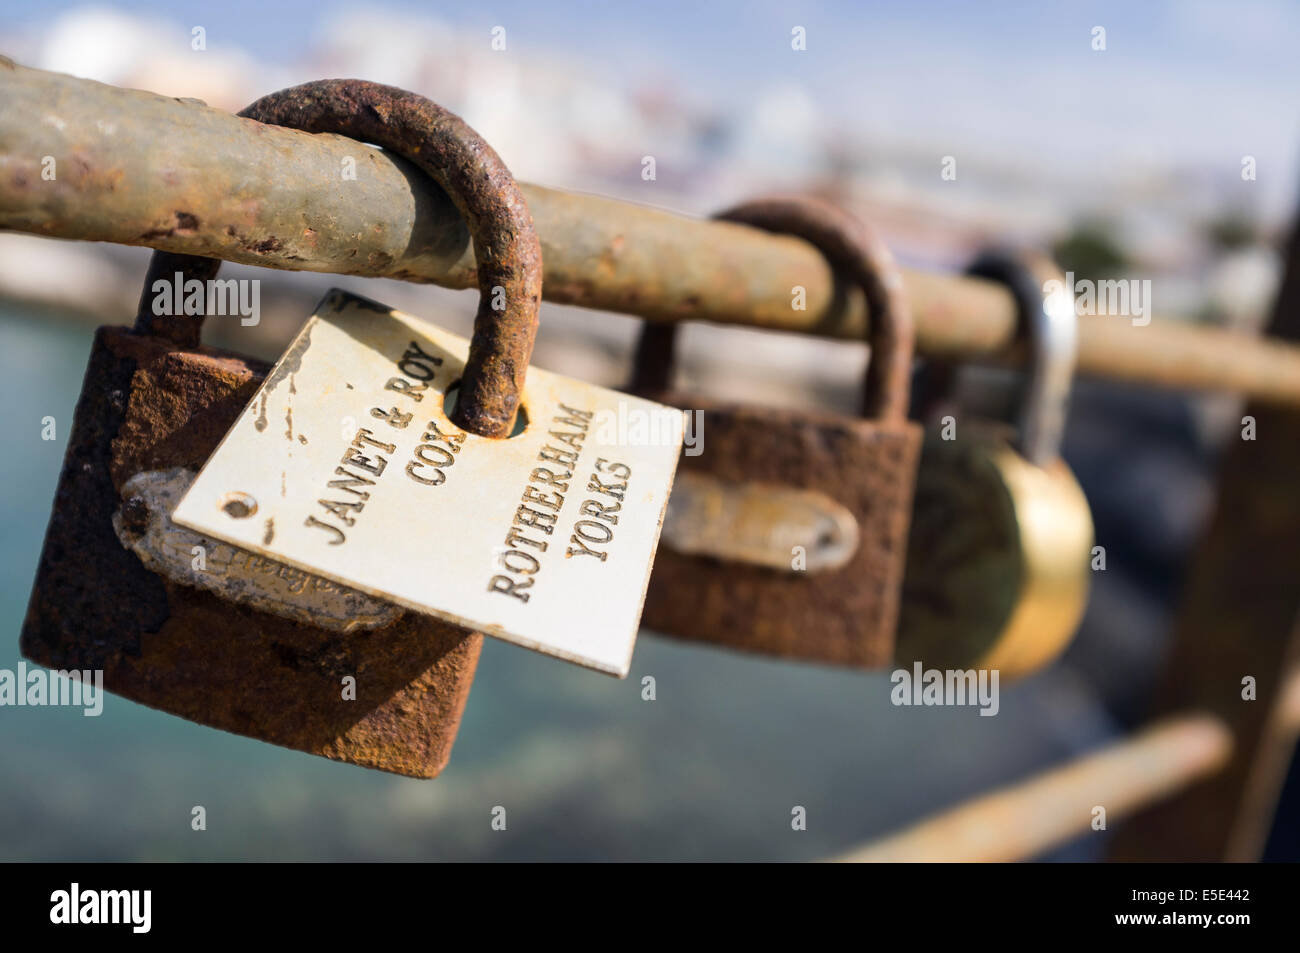 Padlocks on a railing put there by lovers as a symbol of everlasting love. La caleta, tenerife, canary islands, Spain. Stock Photo